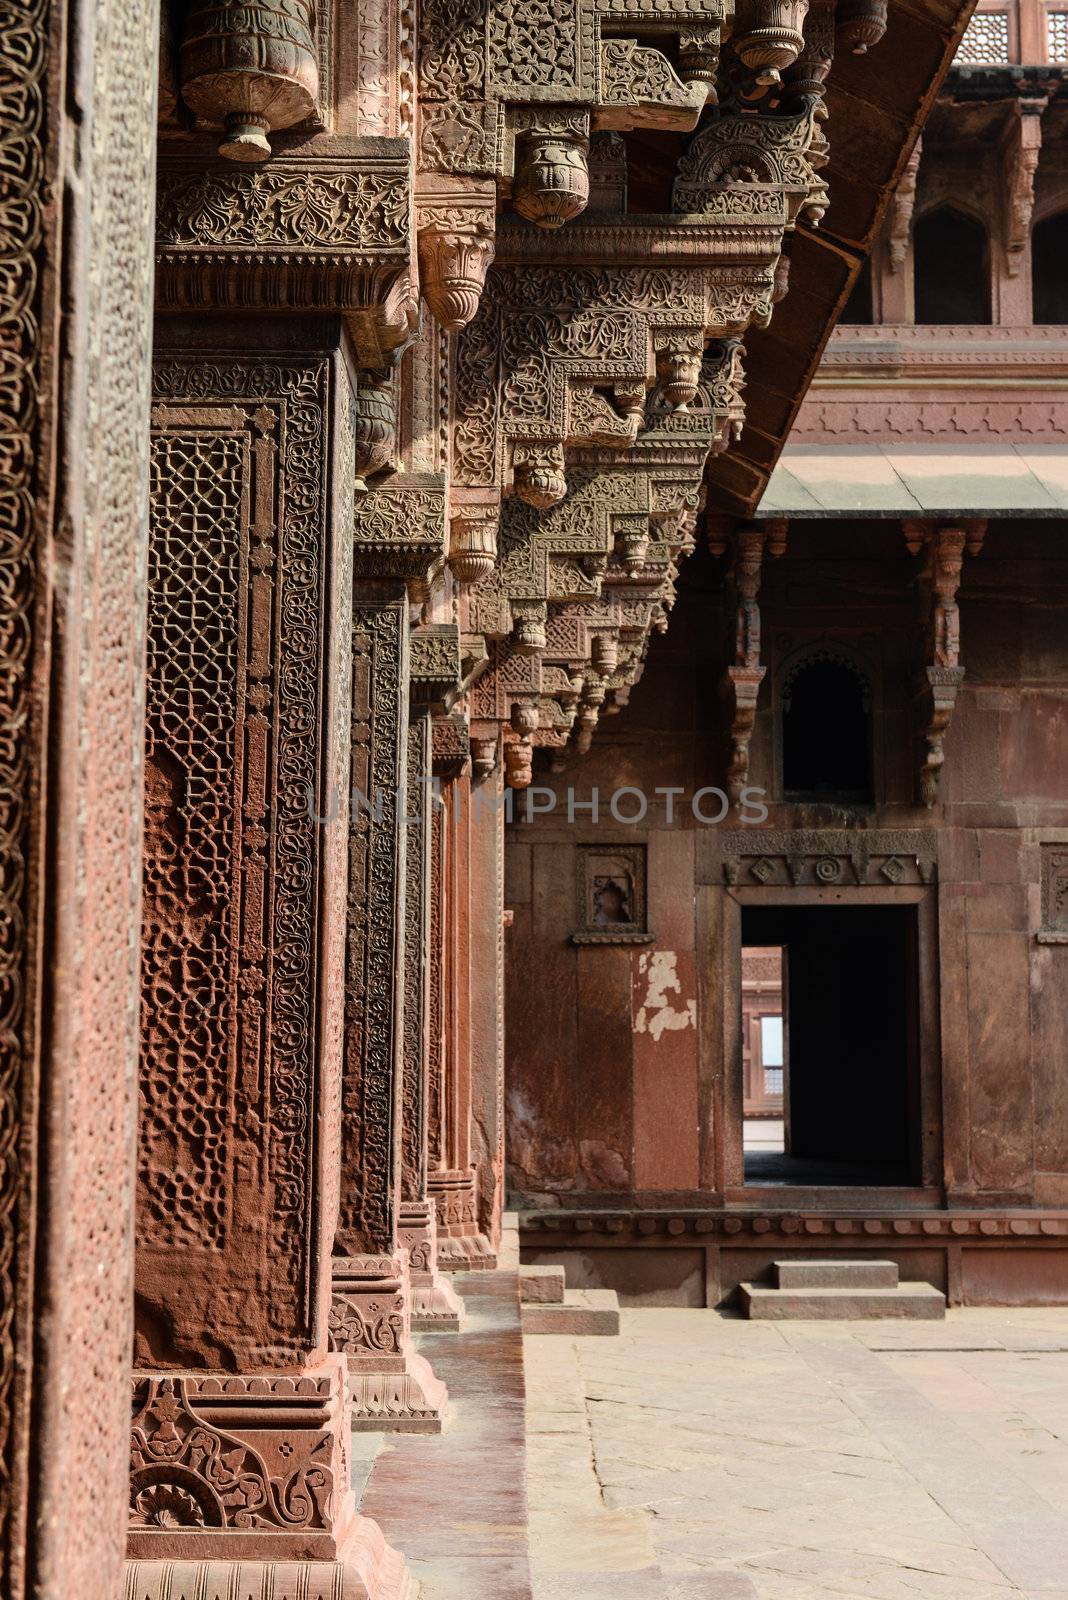 Pillars at Fort Agra in India